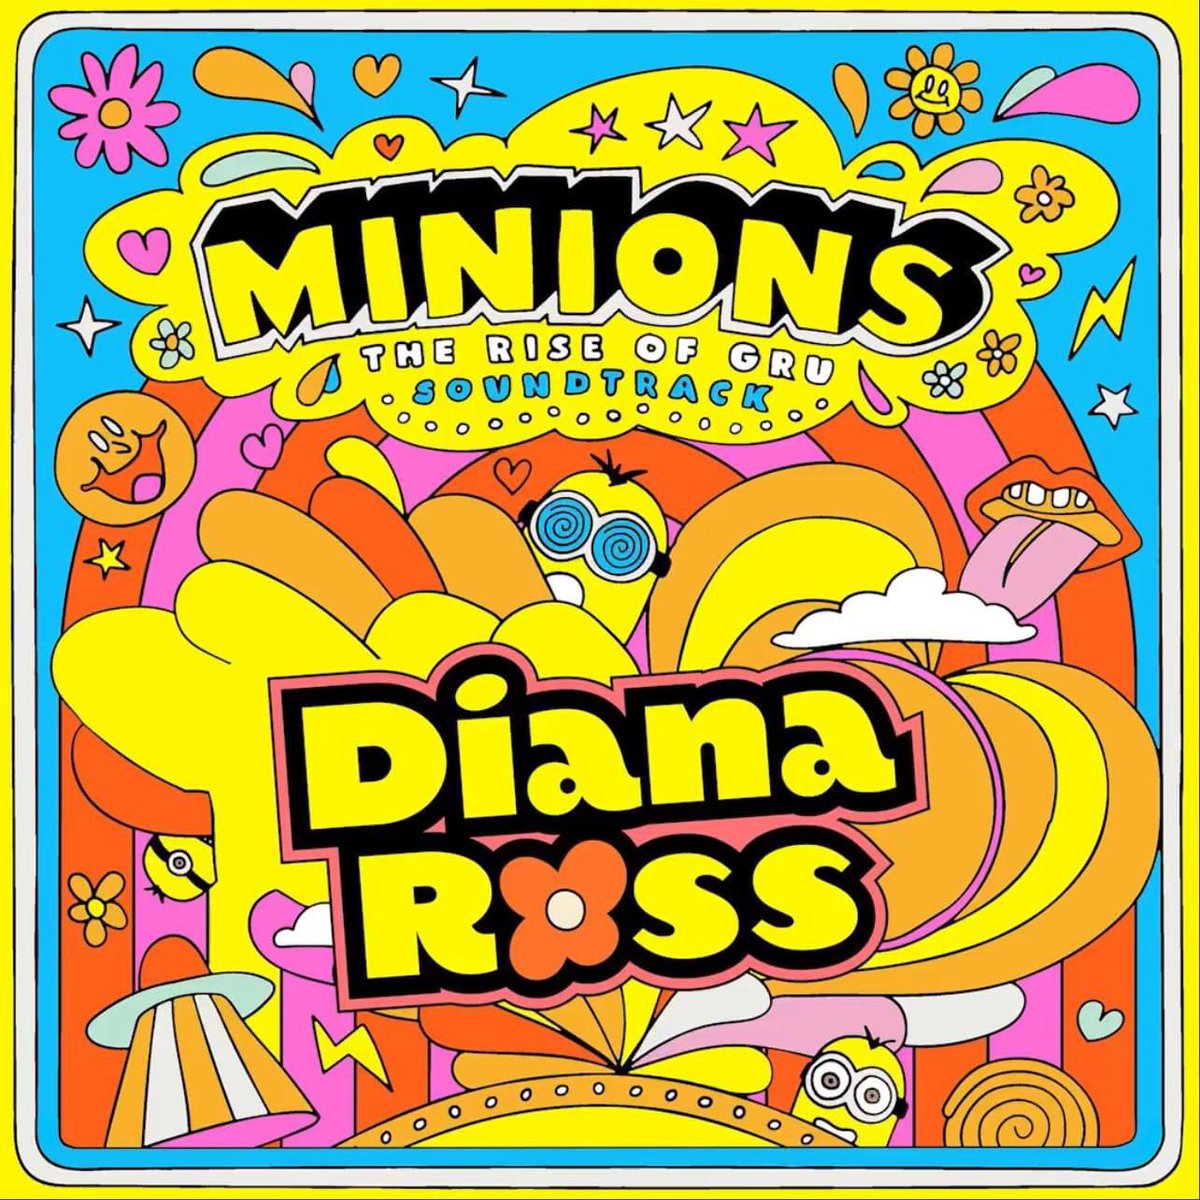 Today in 2022, #DianaRoss released the single 'Turn Up the Sunshine.' From the film 'Minions: The Rise of Gru,' it hit #19 on Billboard's Adult Contemporary chart.